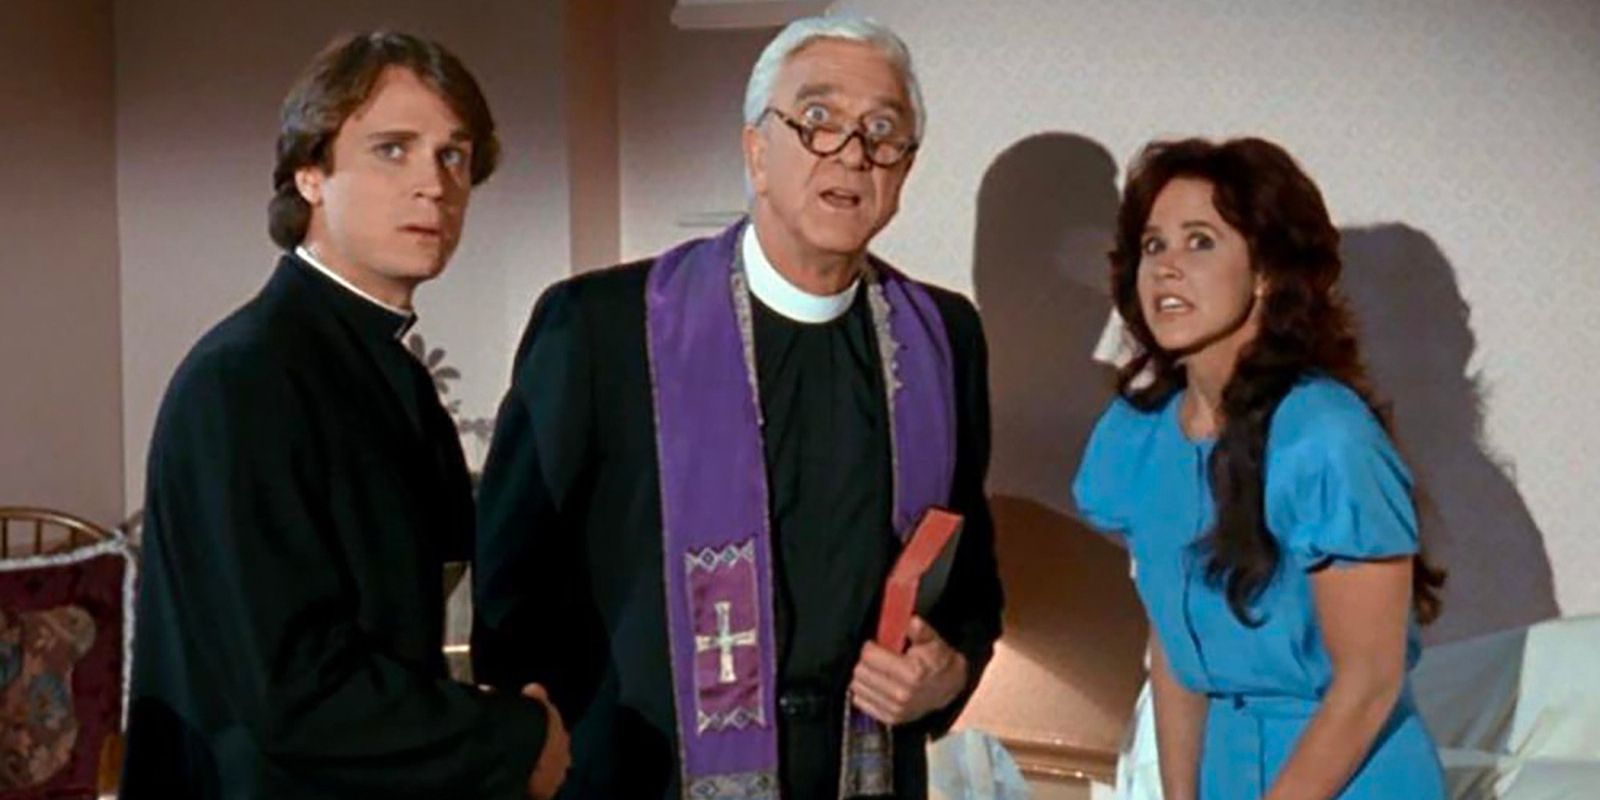 Two catholic priests shake hands as they stand next to a woman, all of them look up at something in shock.